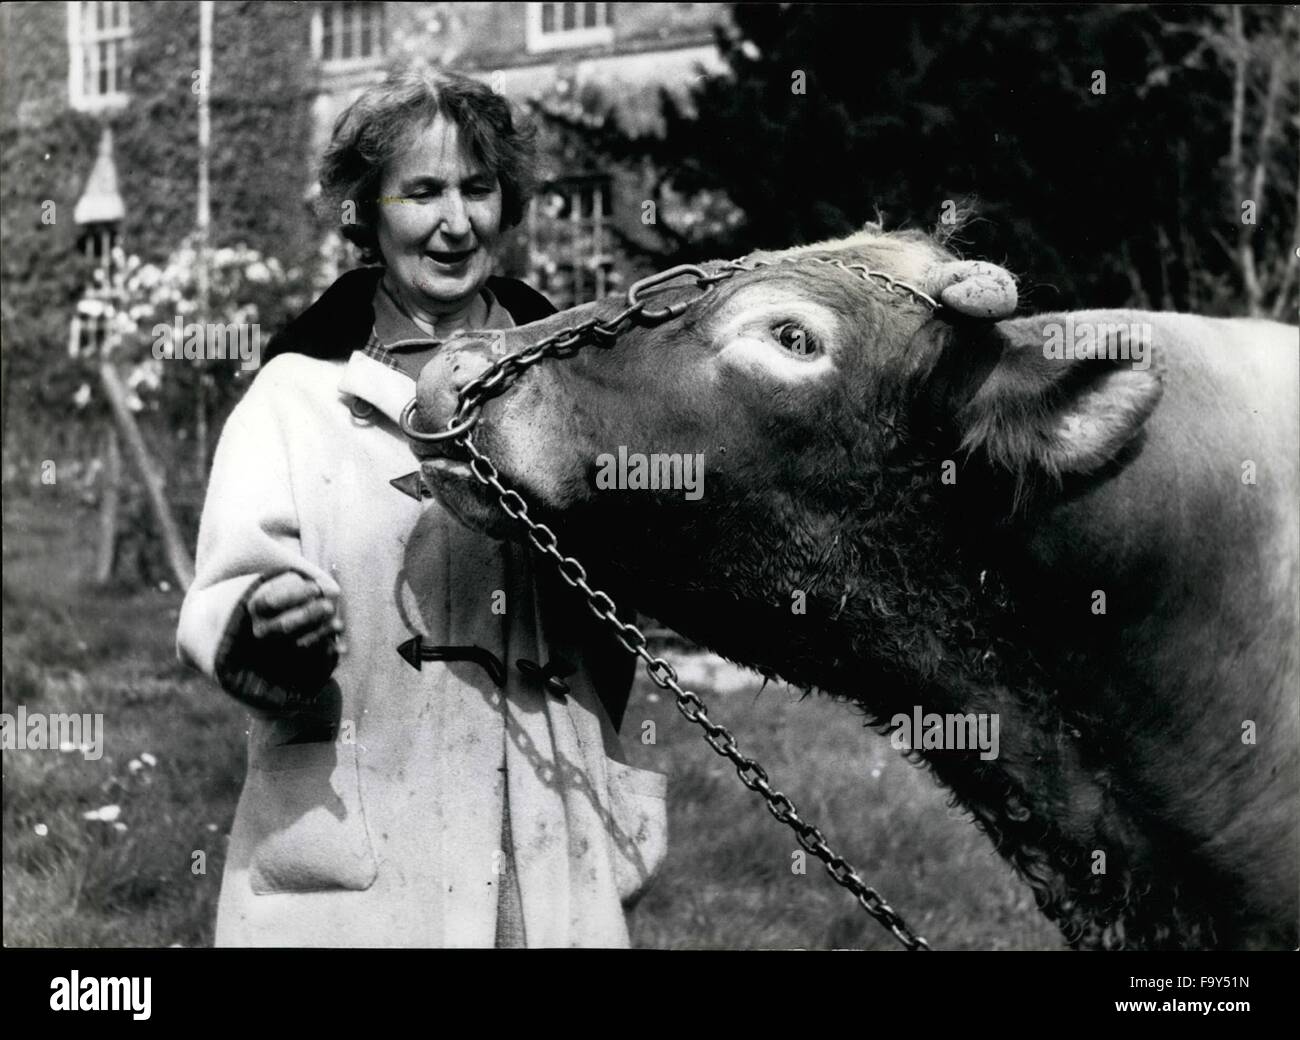 1968 - Misss Molly Atherton, Superintendent, Who Has Been At Ferne, S For The Past 16 Years, Is On Very Freionly Terms With 14 Year-Old Apollo, The Bull Saved From Slaughter After Retirement From The Famous Hamilton Herd. He Has Appeared On Bbc -Tv, S .G000 Companions'' Programme And Brought In Some Money For Ferne. © Keystone Pictures USA/ZUMAPRESS.com/Alamy Live News Stock Photo